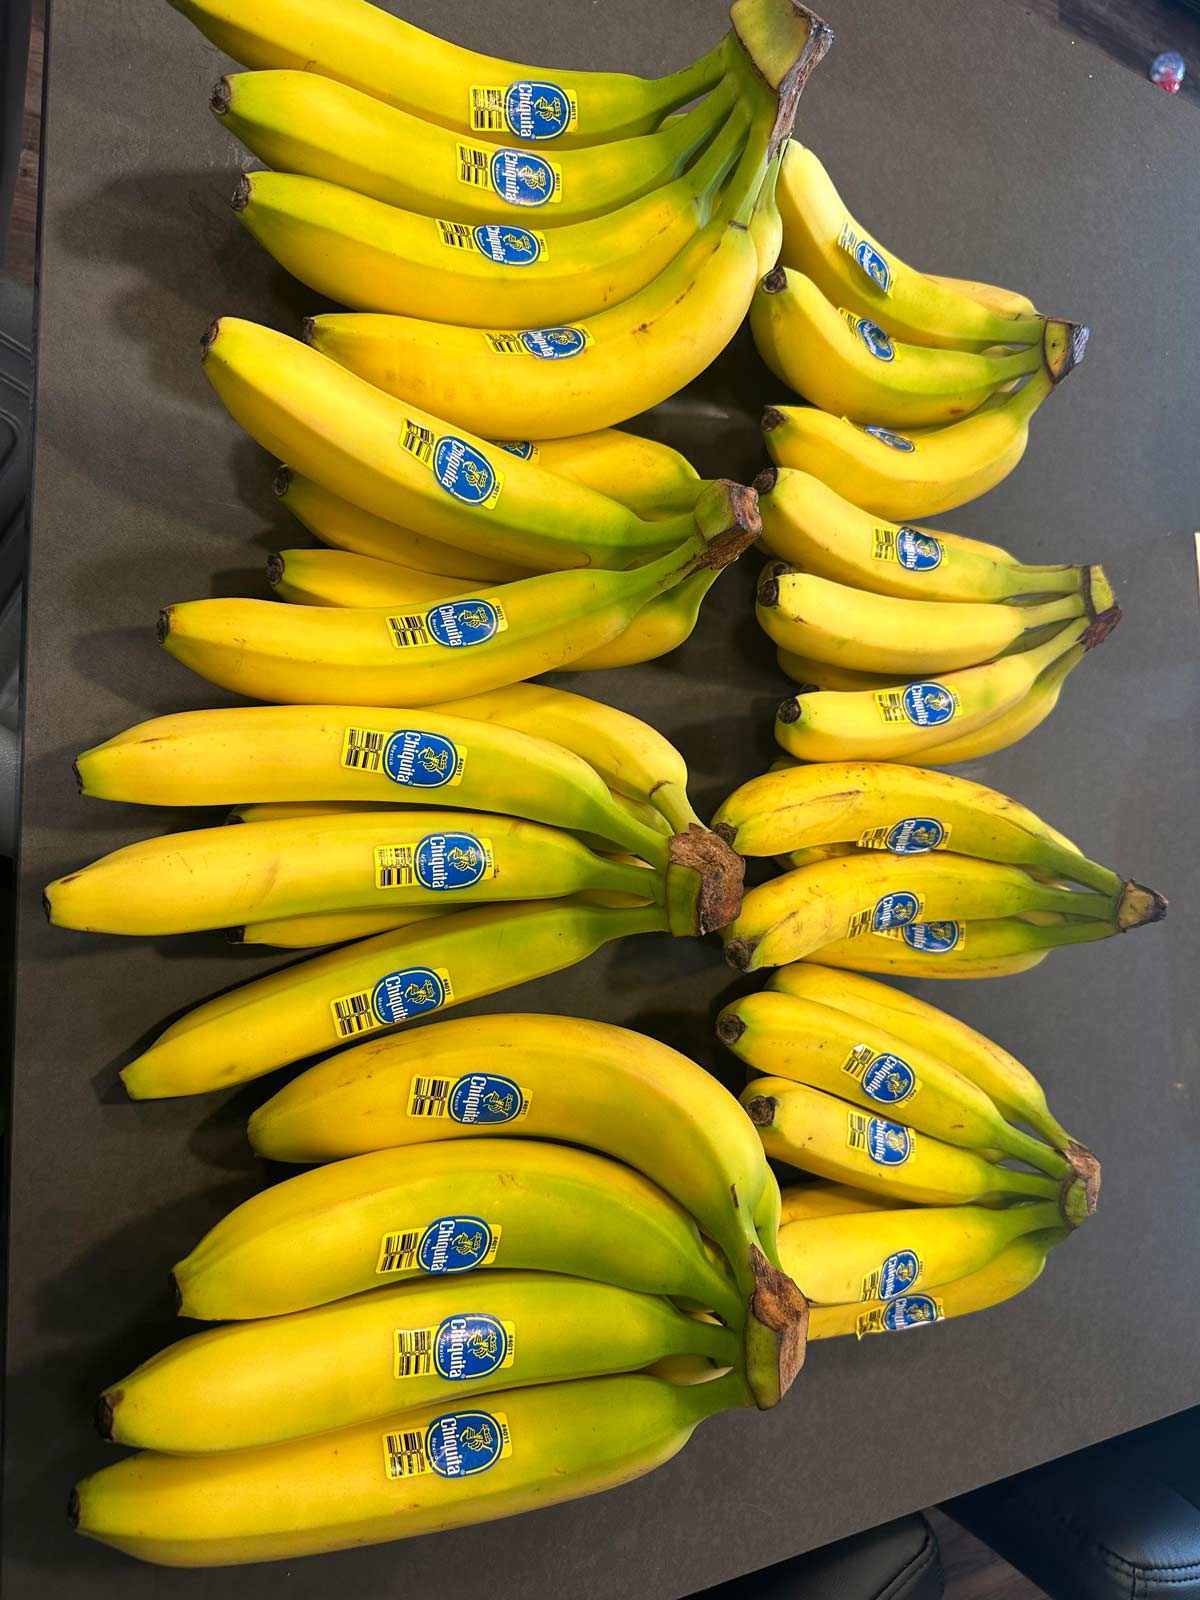 Cool Stuff I requested 8 bananas in my weekly grocery pickup order... They gave me 8 bunches, and managed to only charge me $0.68 - the price of one single banana